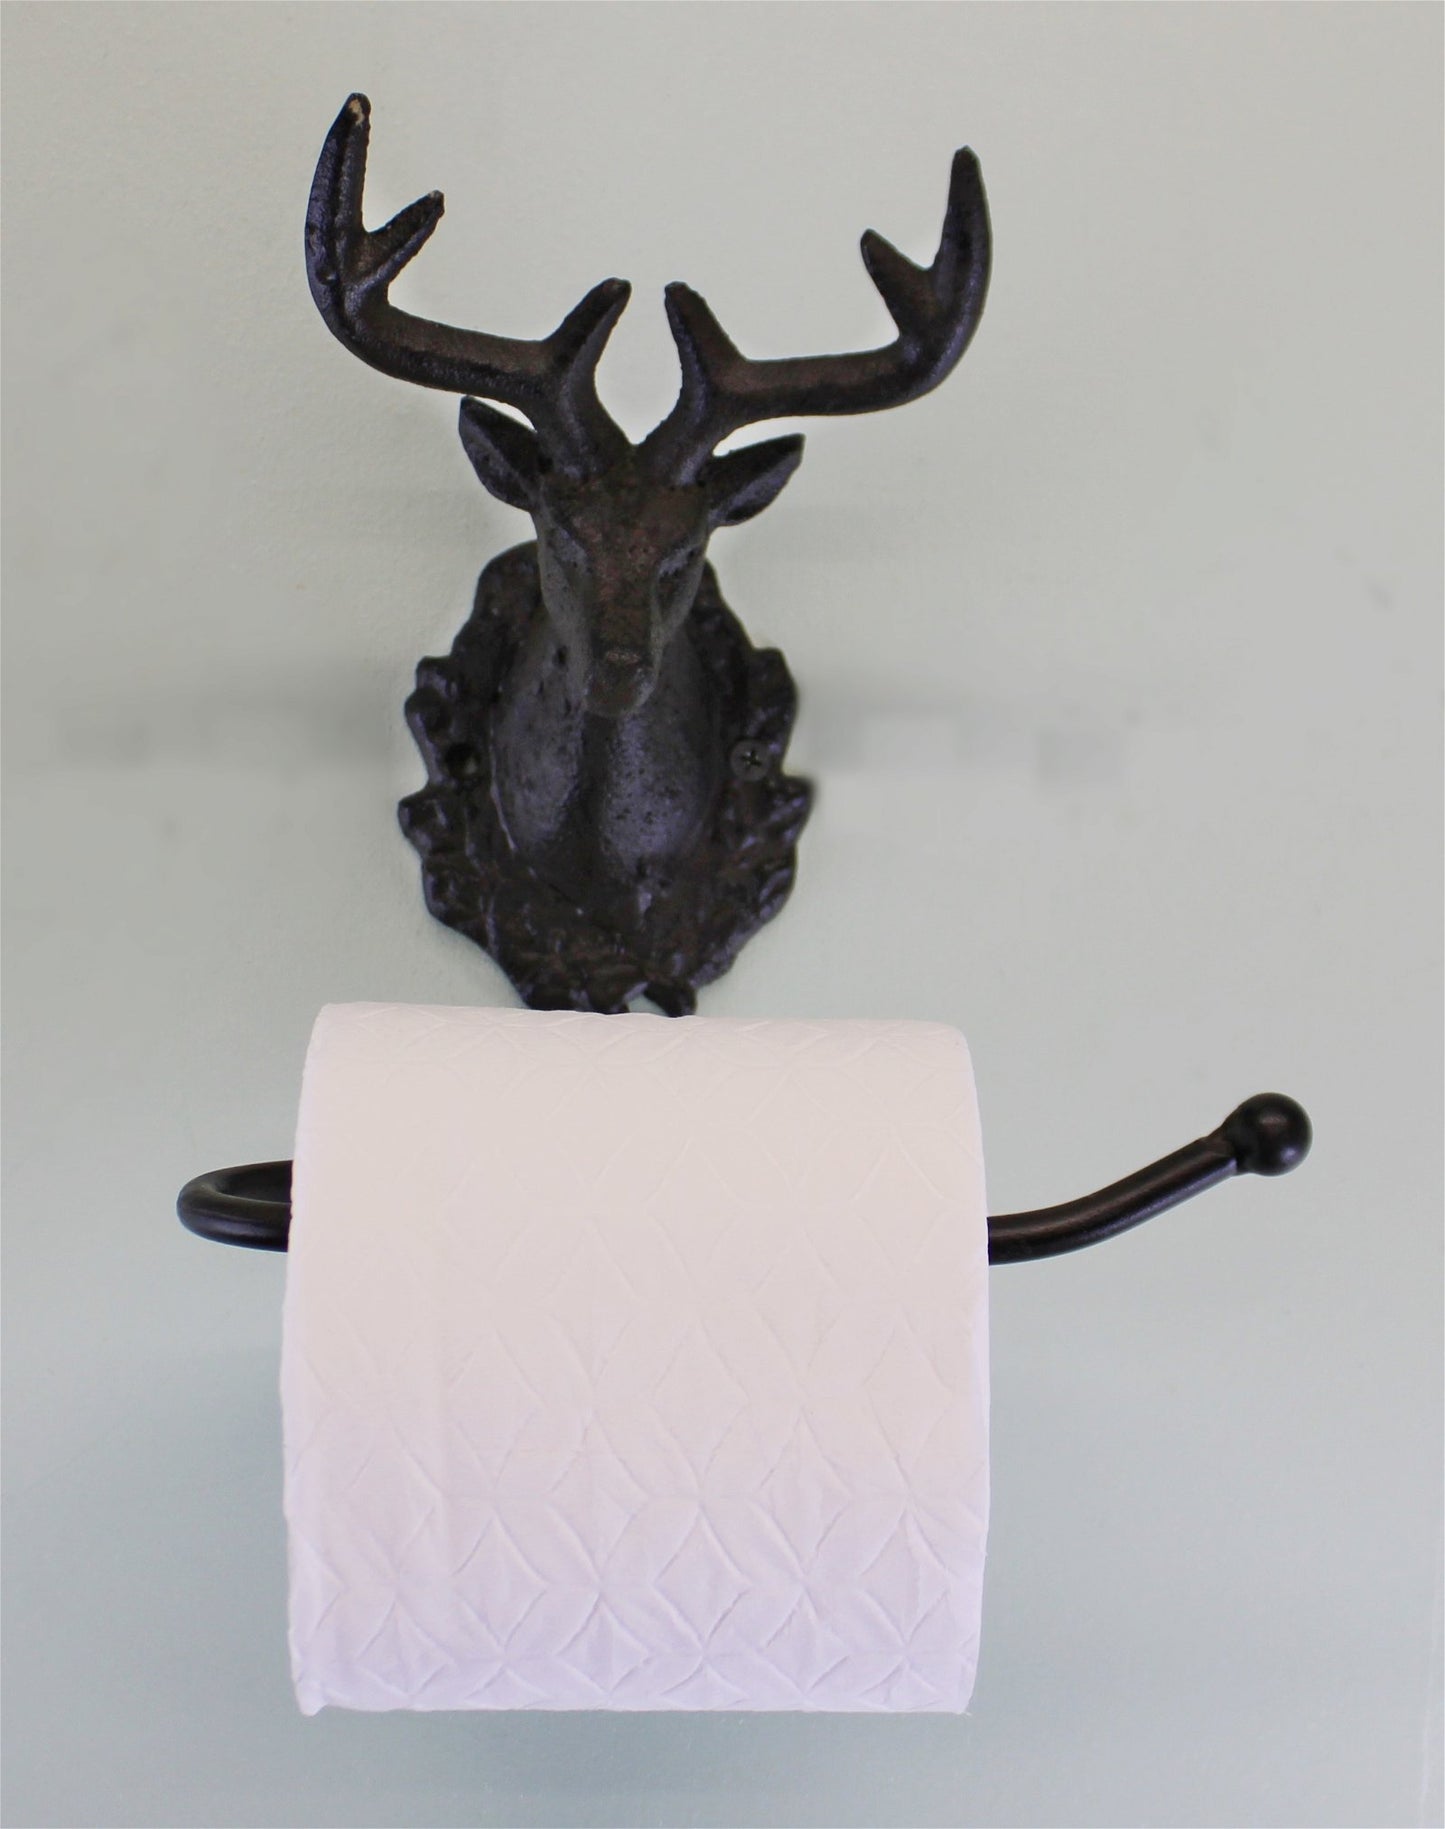 Cast Iron Rustic Toilet Roll Holder, Stag Head Design